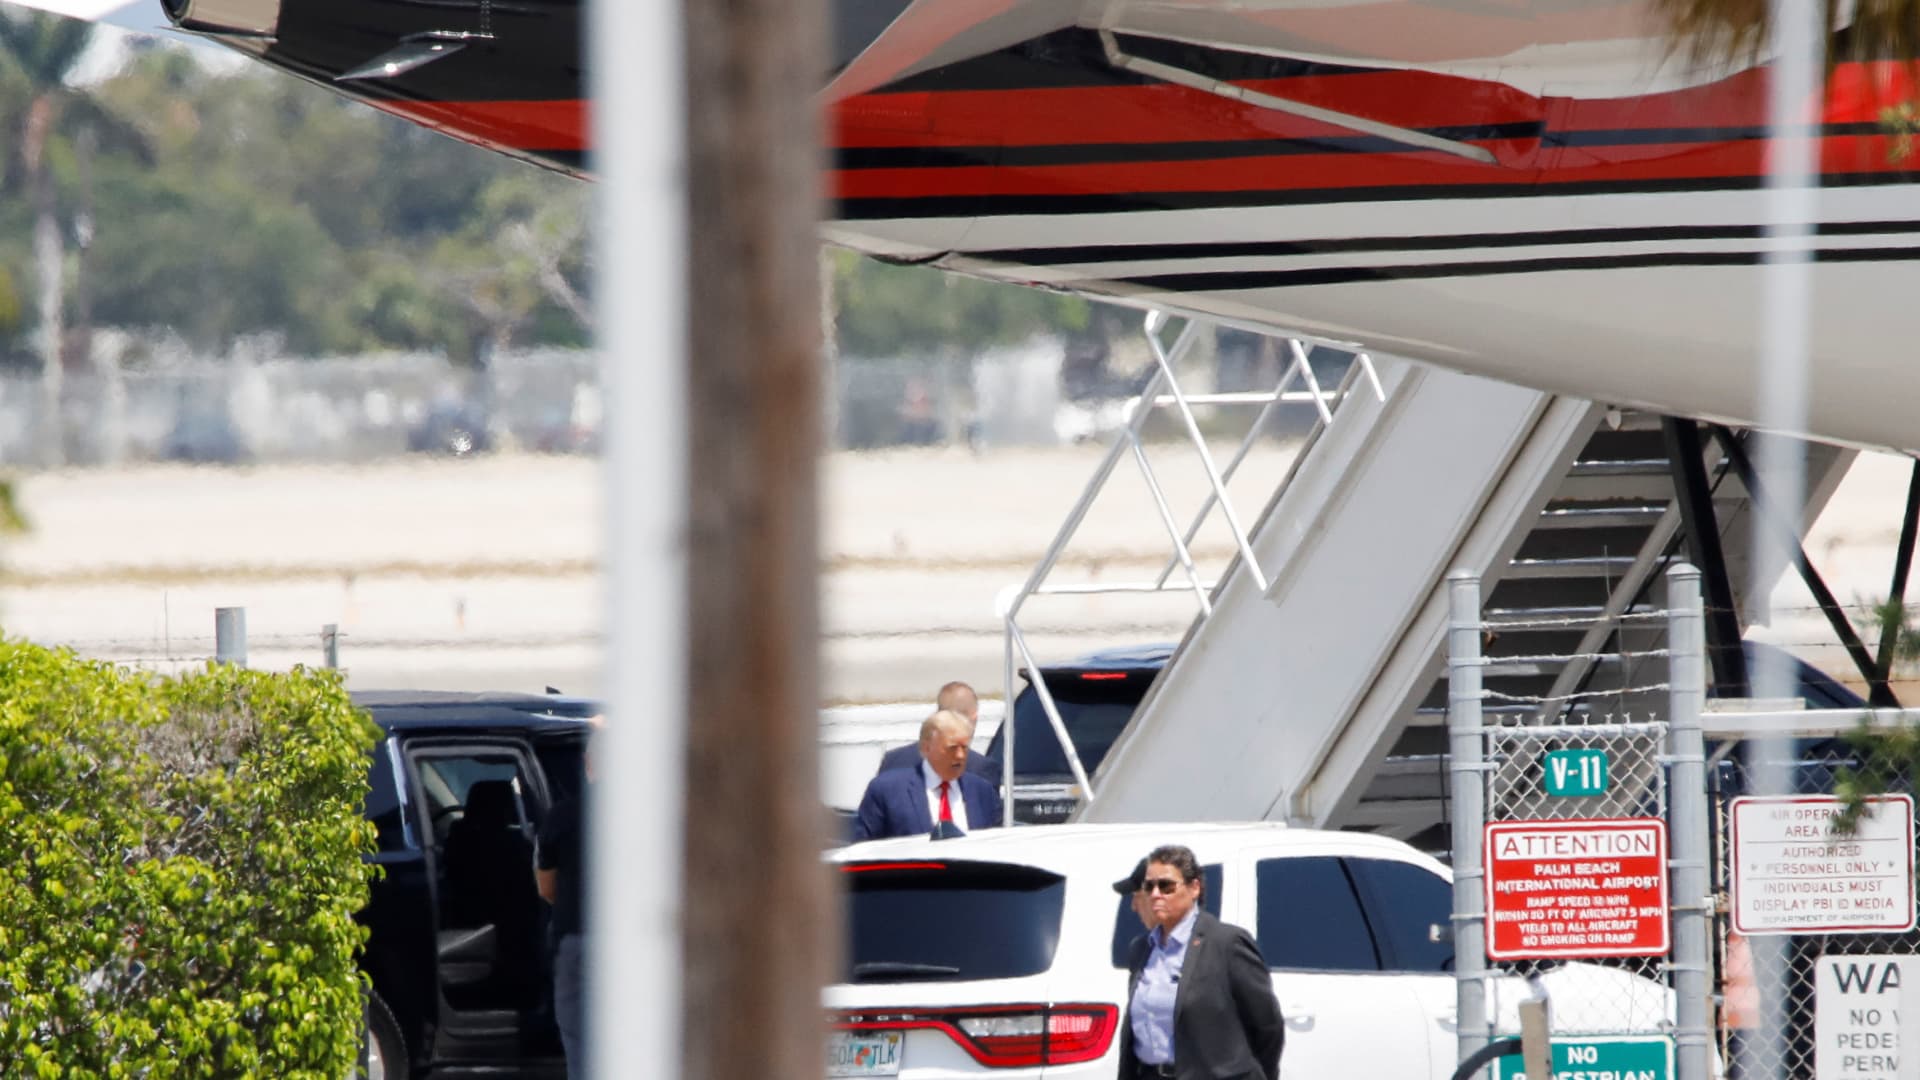 Former U.S. President Donald Trump stands near his plane, at the Palm Beach International Airport, after former his indictment by a Manhattan grand jury following a probe into hush money paid to porn star Stormy Daniels, in West Palm Beach, Florida, April 3, 2023.